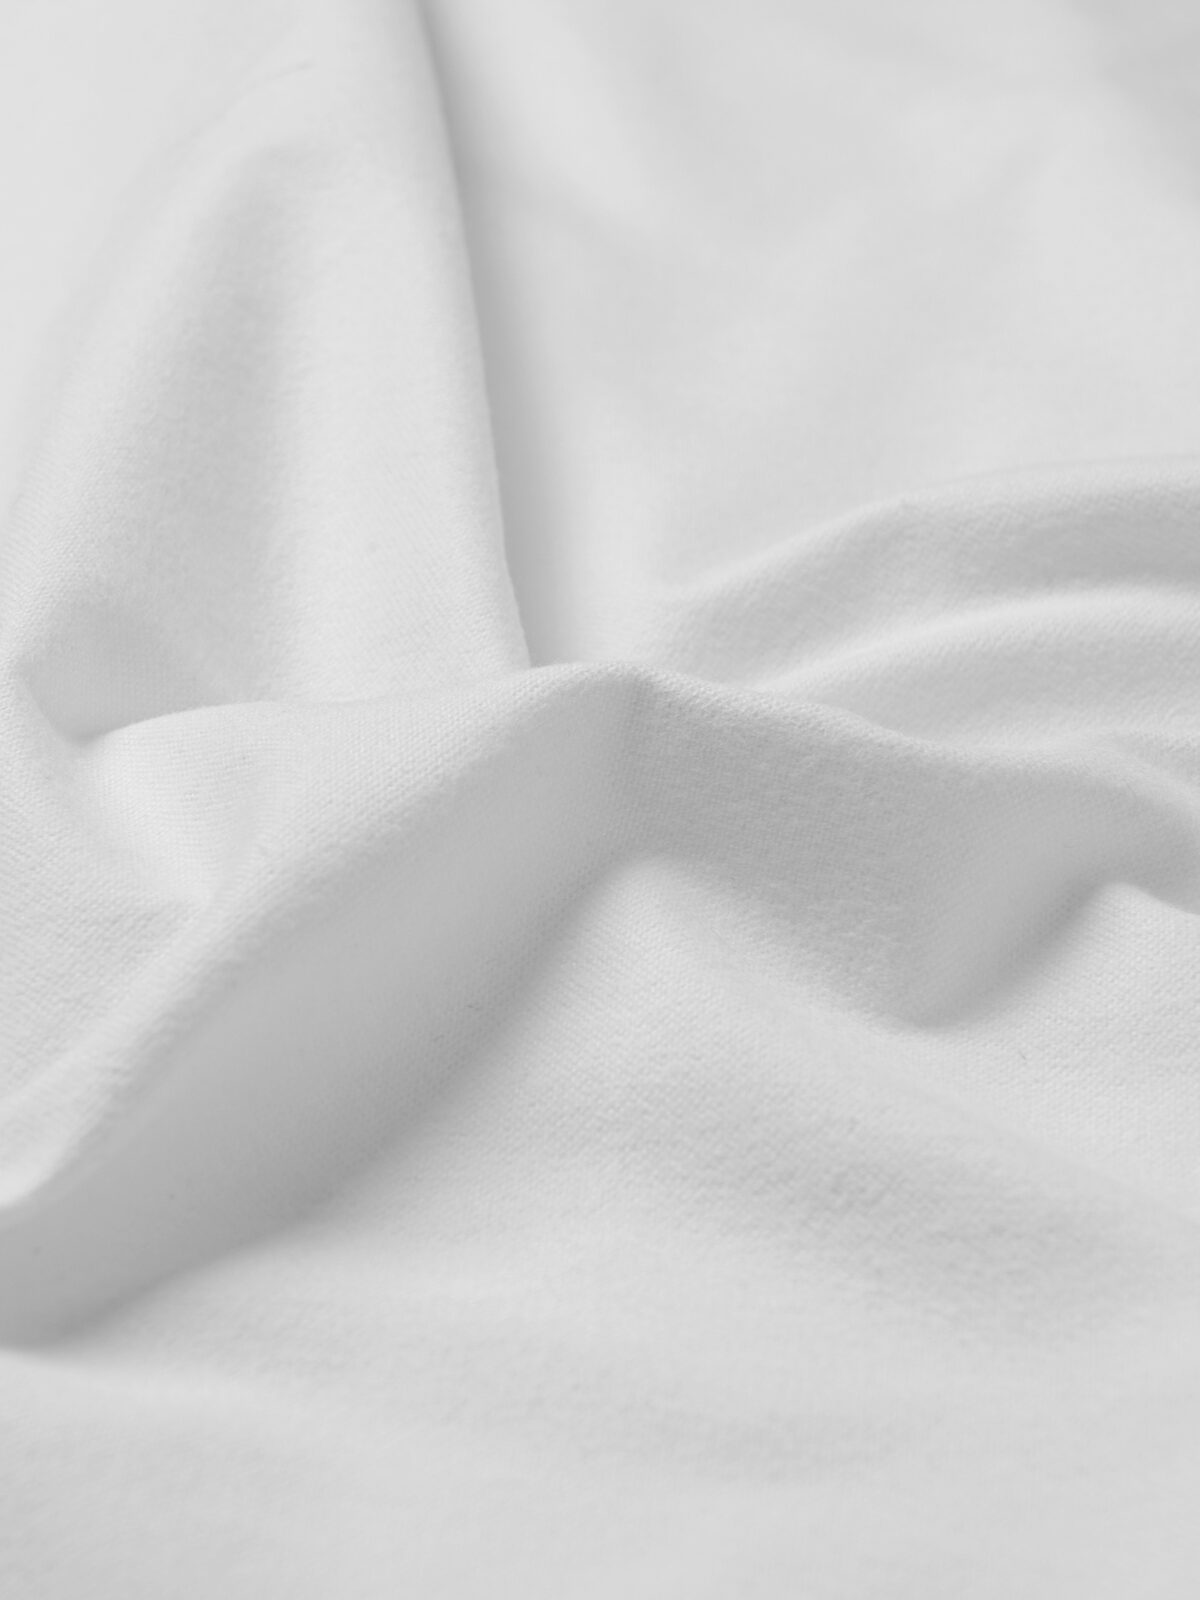 White Brushed Oxford Shirts by Proper Cloth